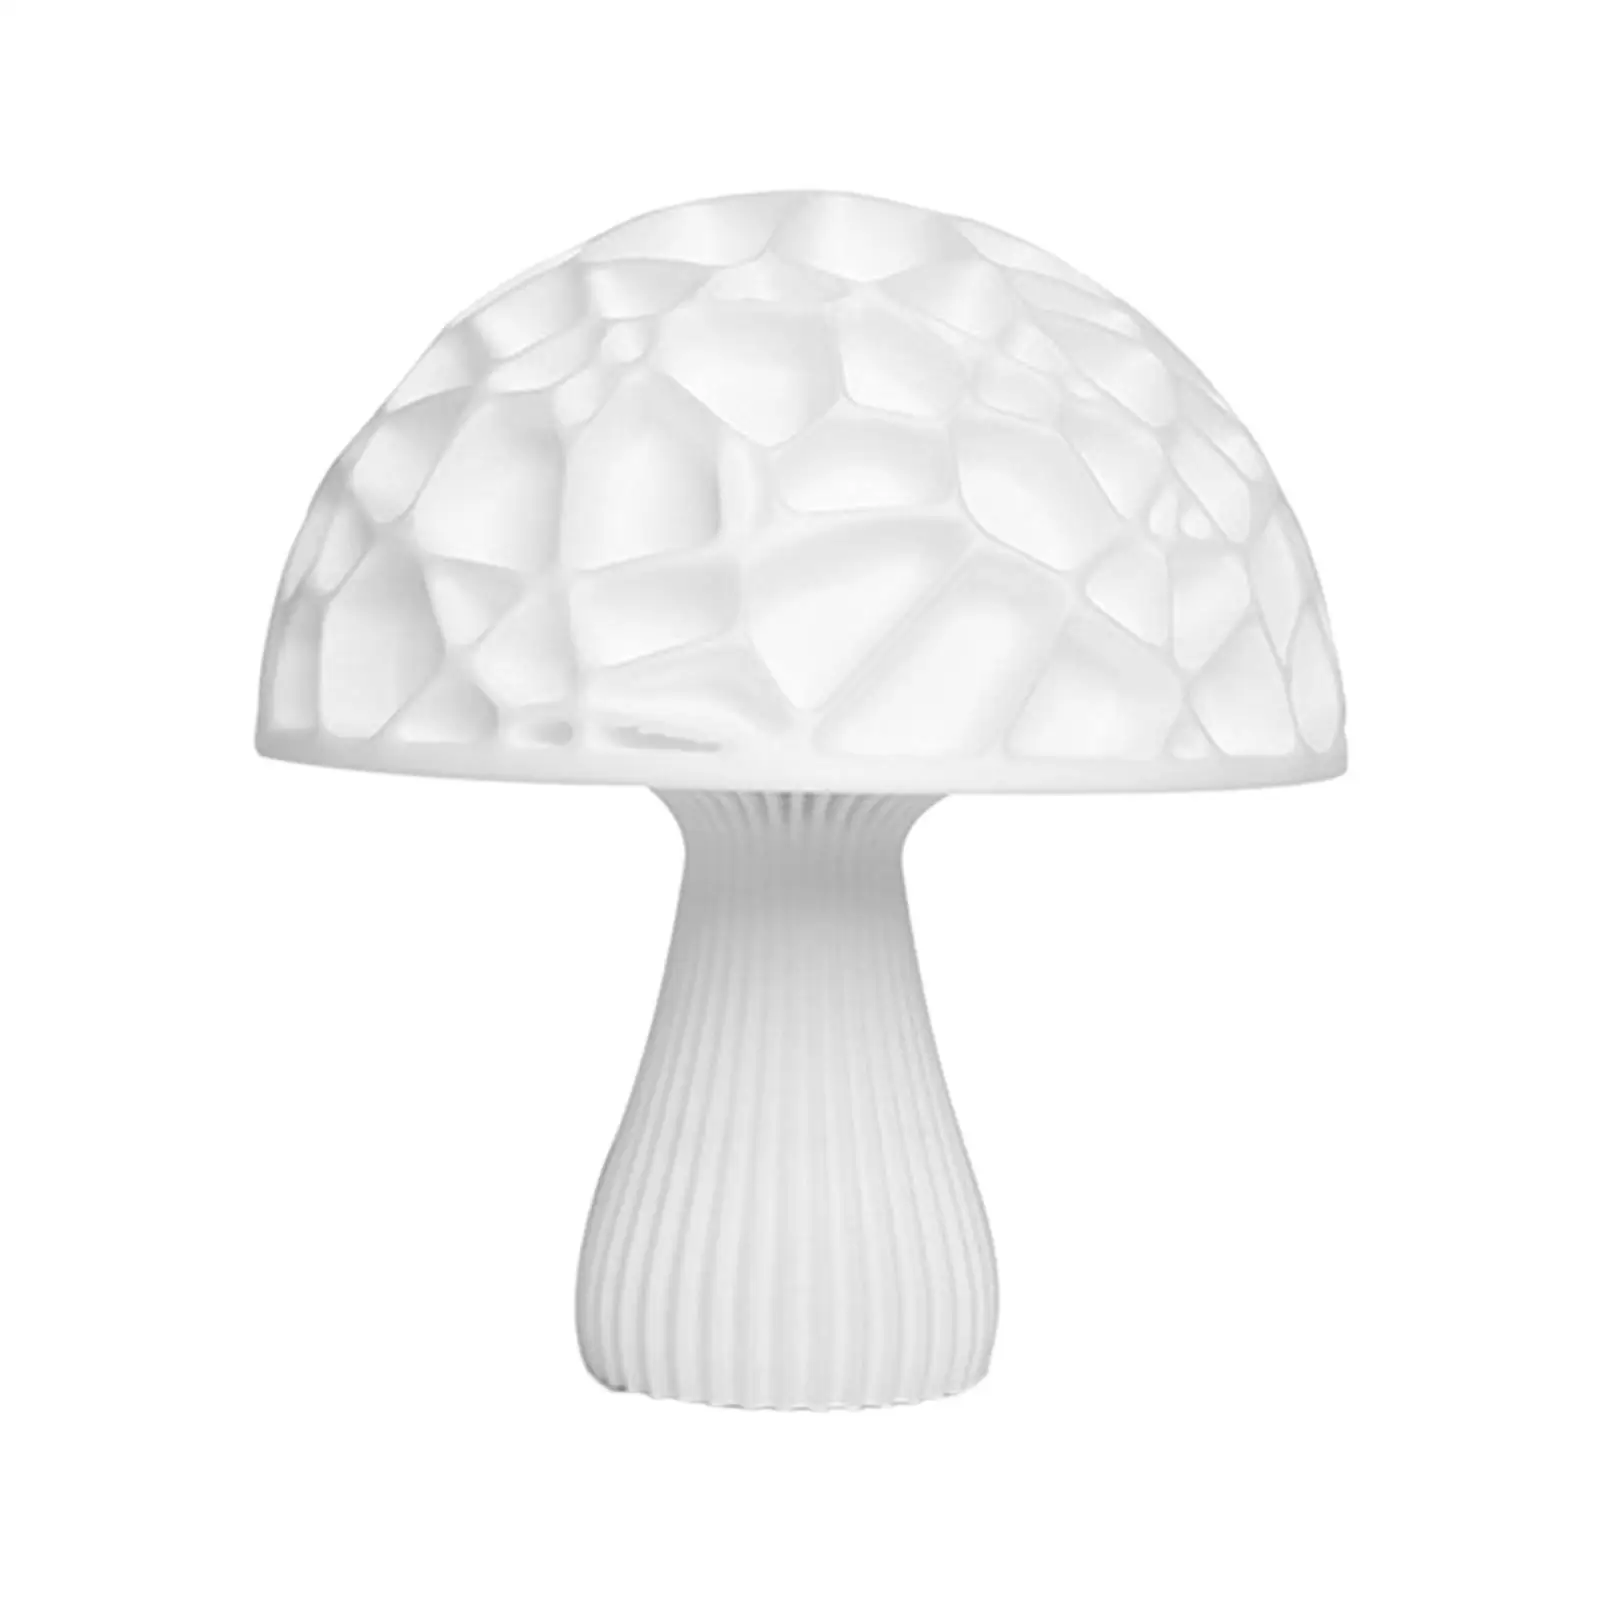 Table Lamp Dimmable LED Mushroom Remote Control  Room Bedside Dorm